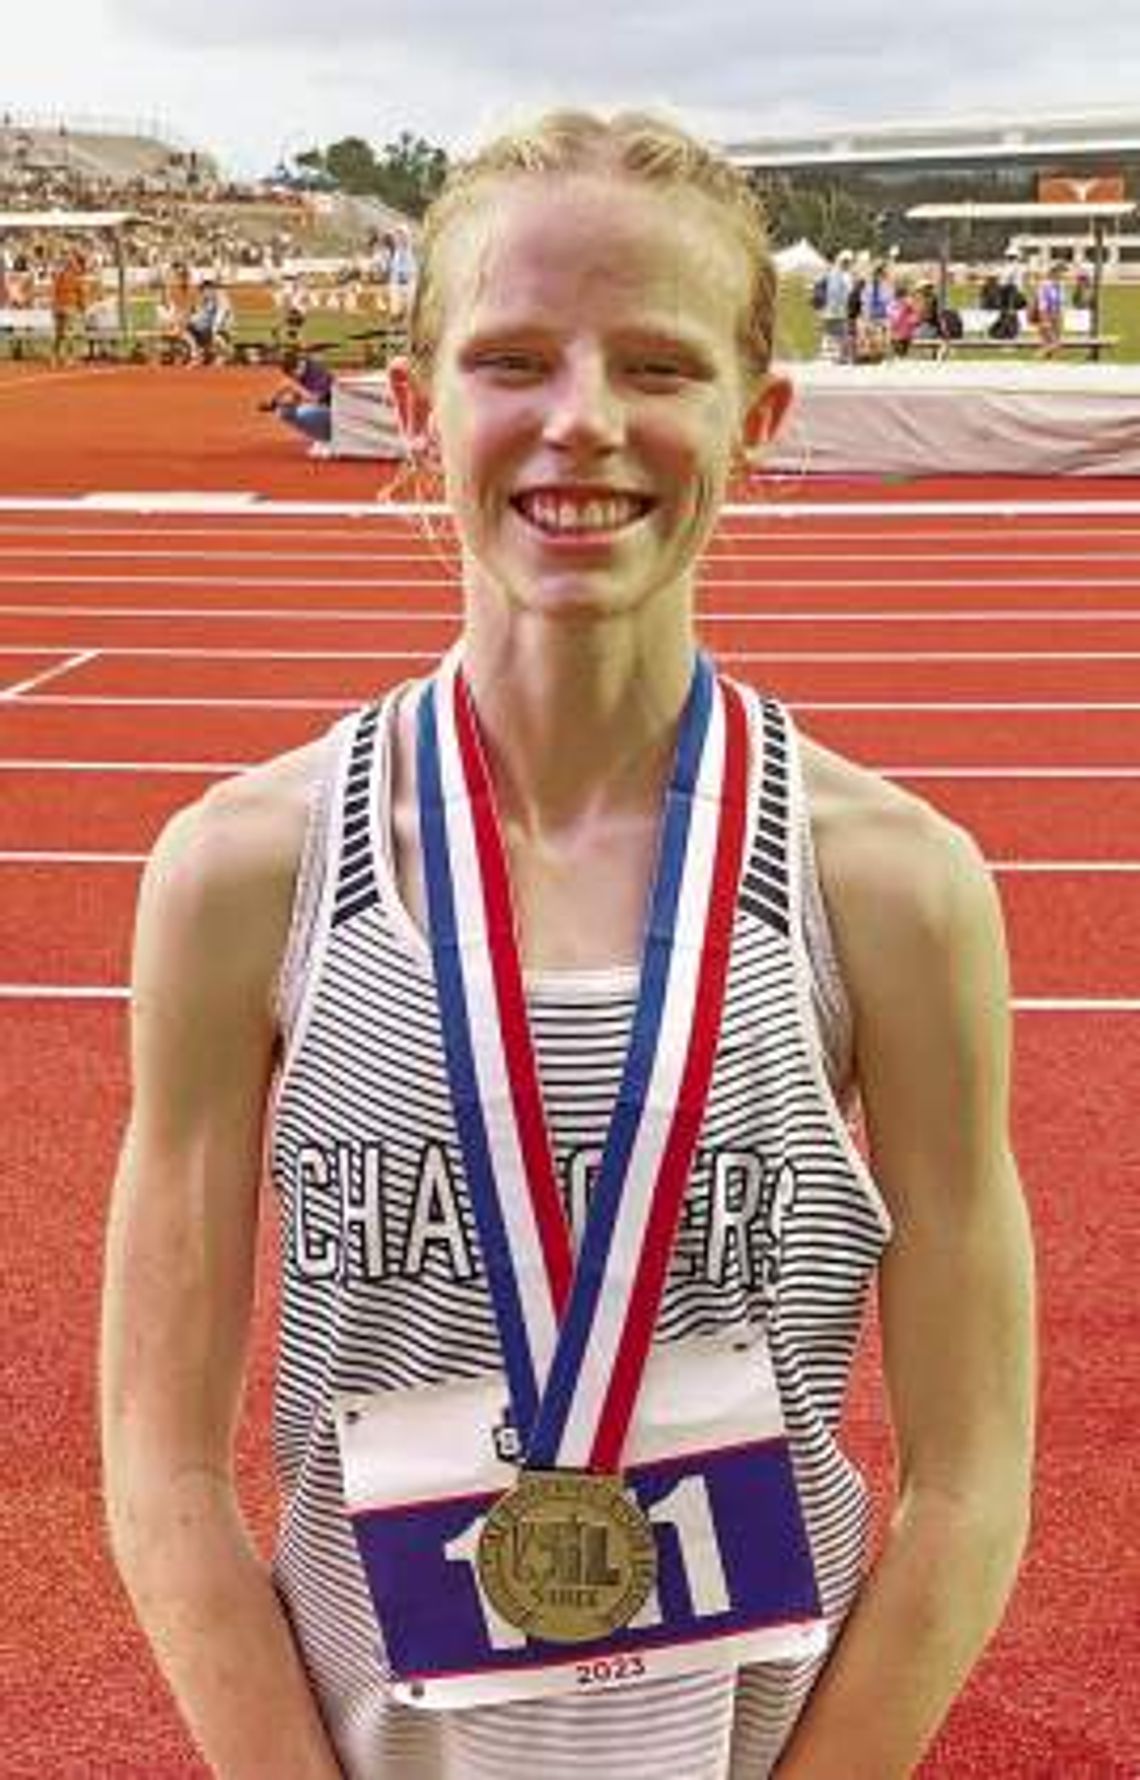 Leachman wins gold as Charger athletes compete at state track and field meet